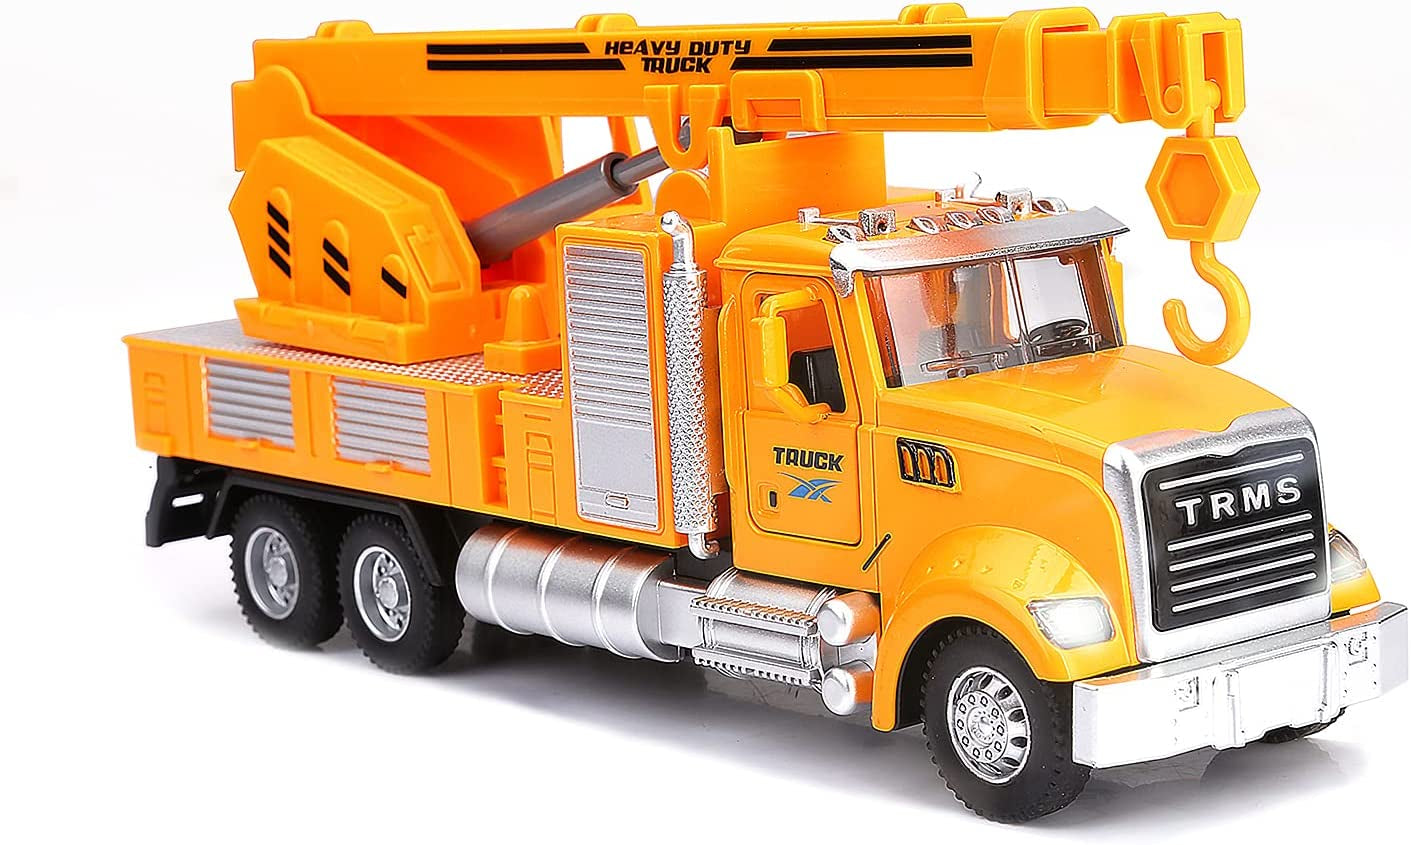 Crane Truck Metal Toy Trucks with Lights and Sounds Construction Toys for Boys Kids Ages 3 and Up